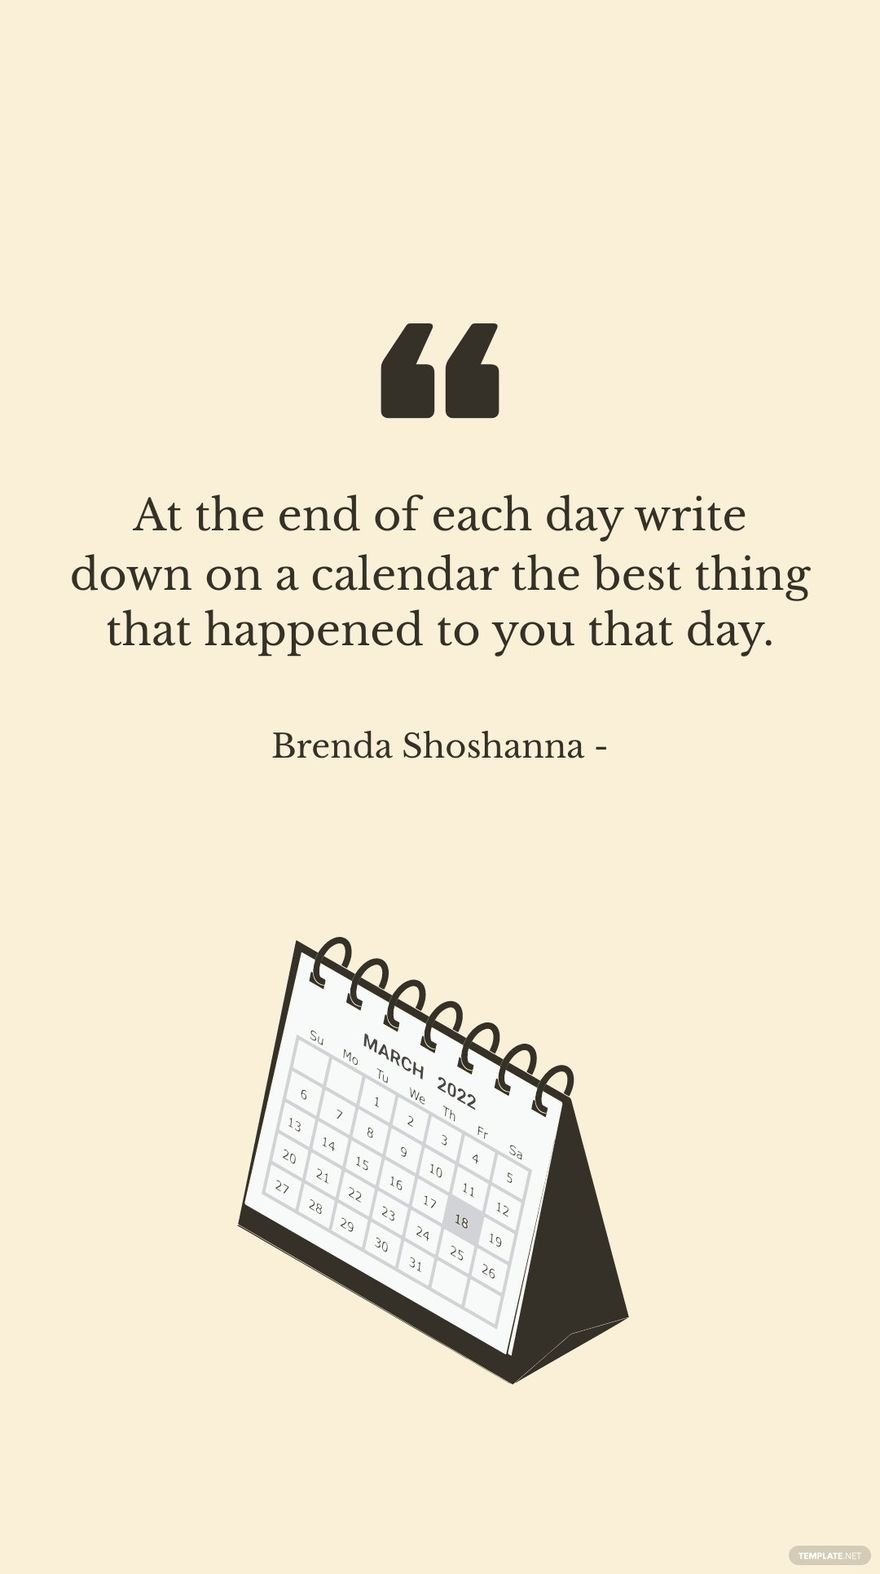 Brenda Shoshanna - At the end of each day write down on a calendar the best thing that happened to you that day.